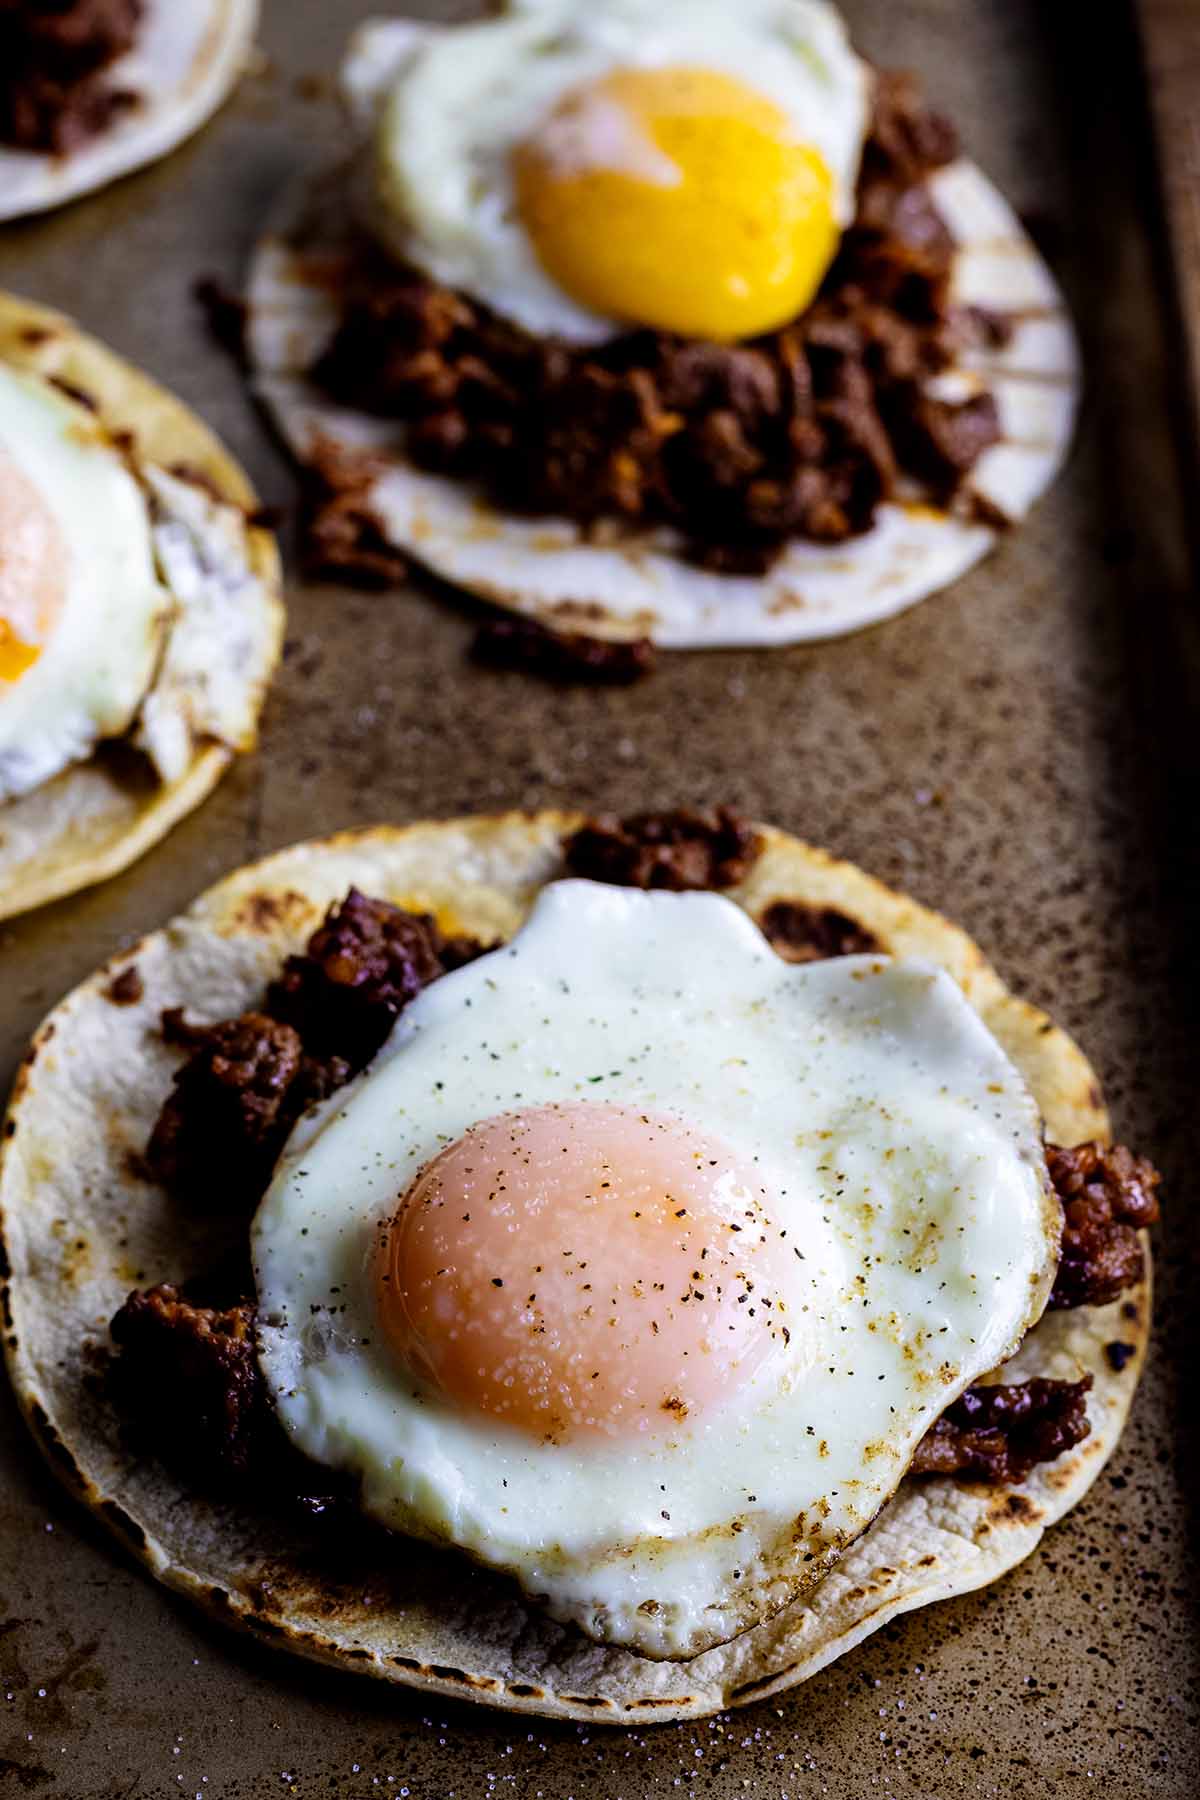 Fried eggs on tacos